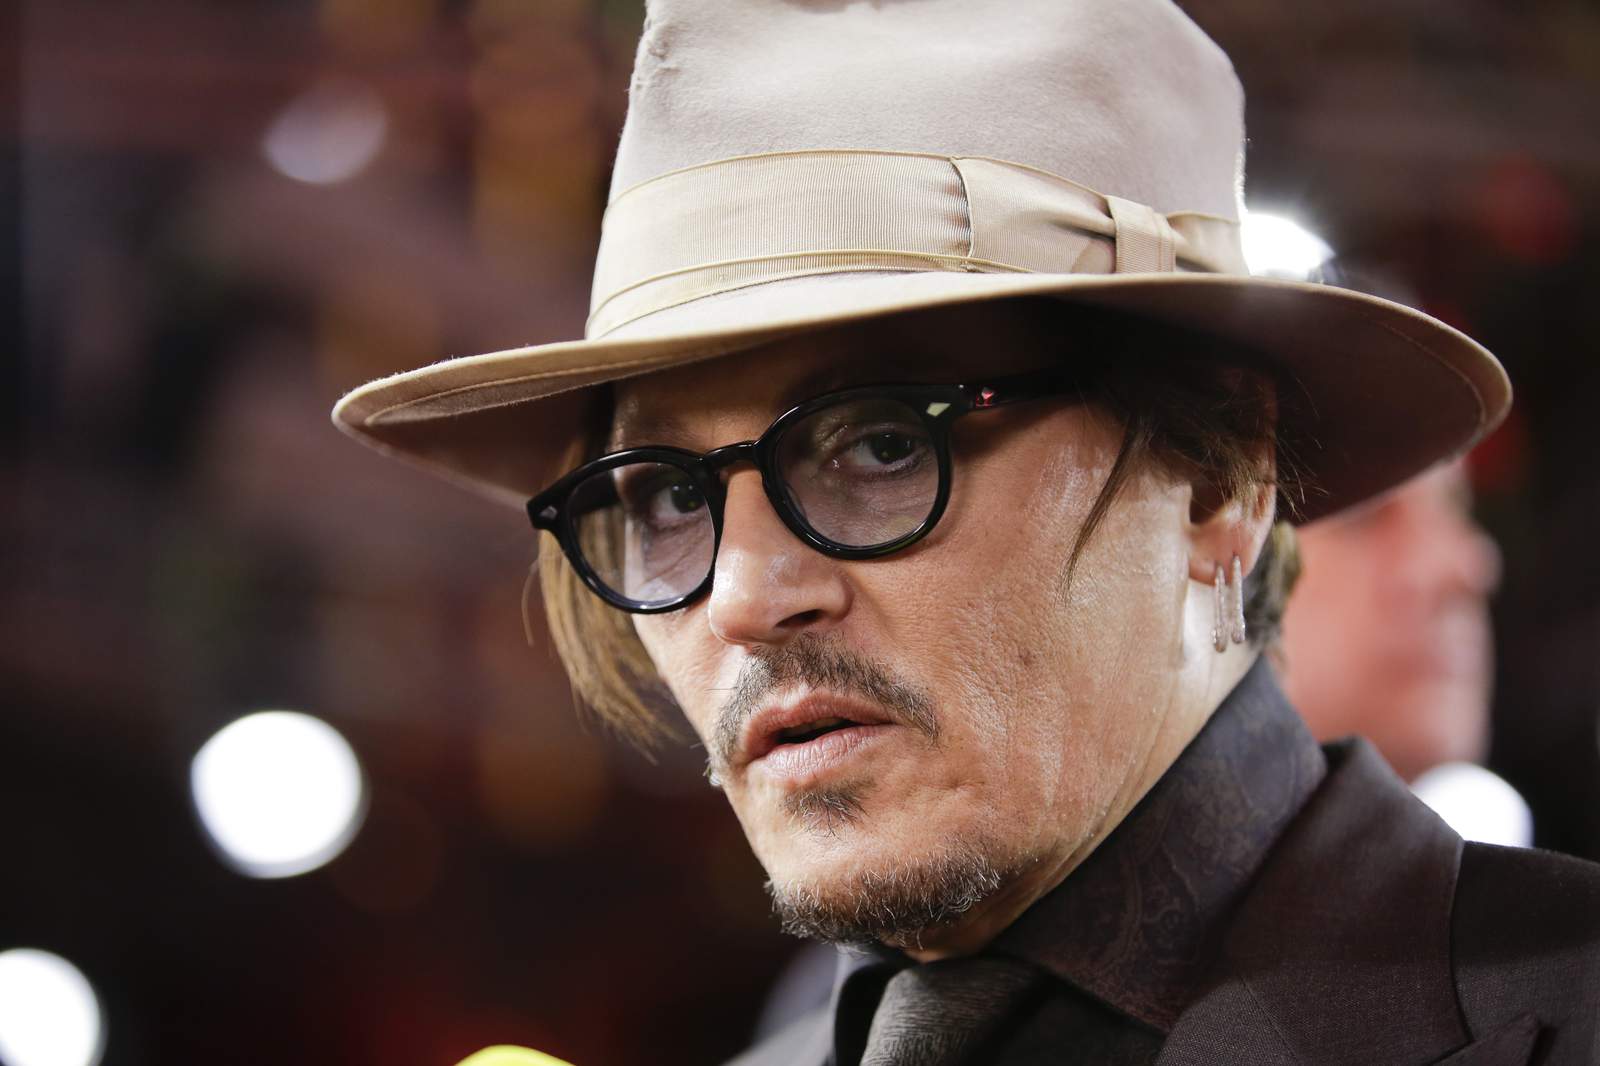 Tabloid's lawyers seek to get Johnny Depp lawsuit thrown out